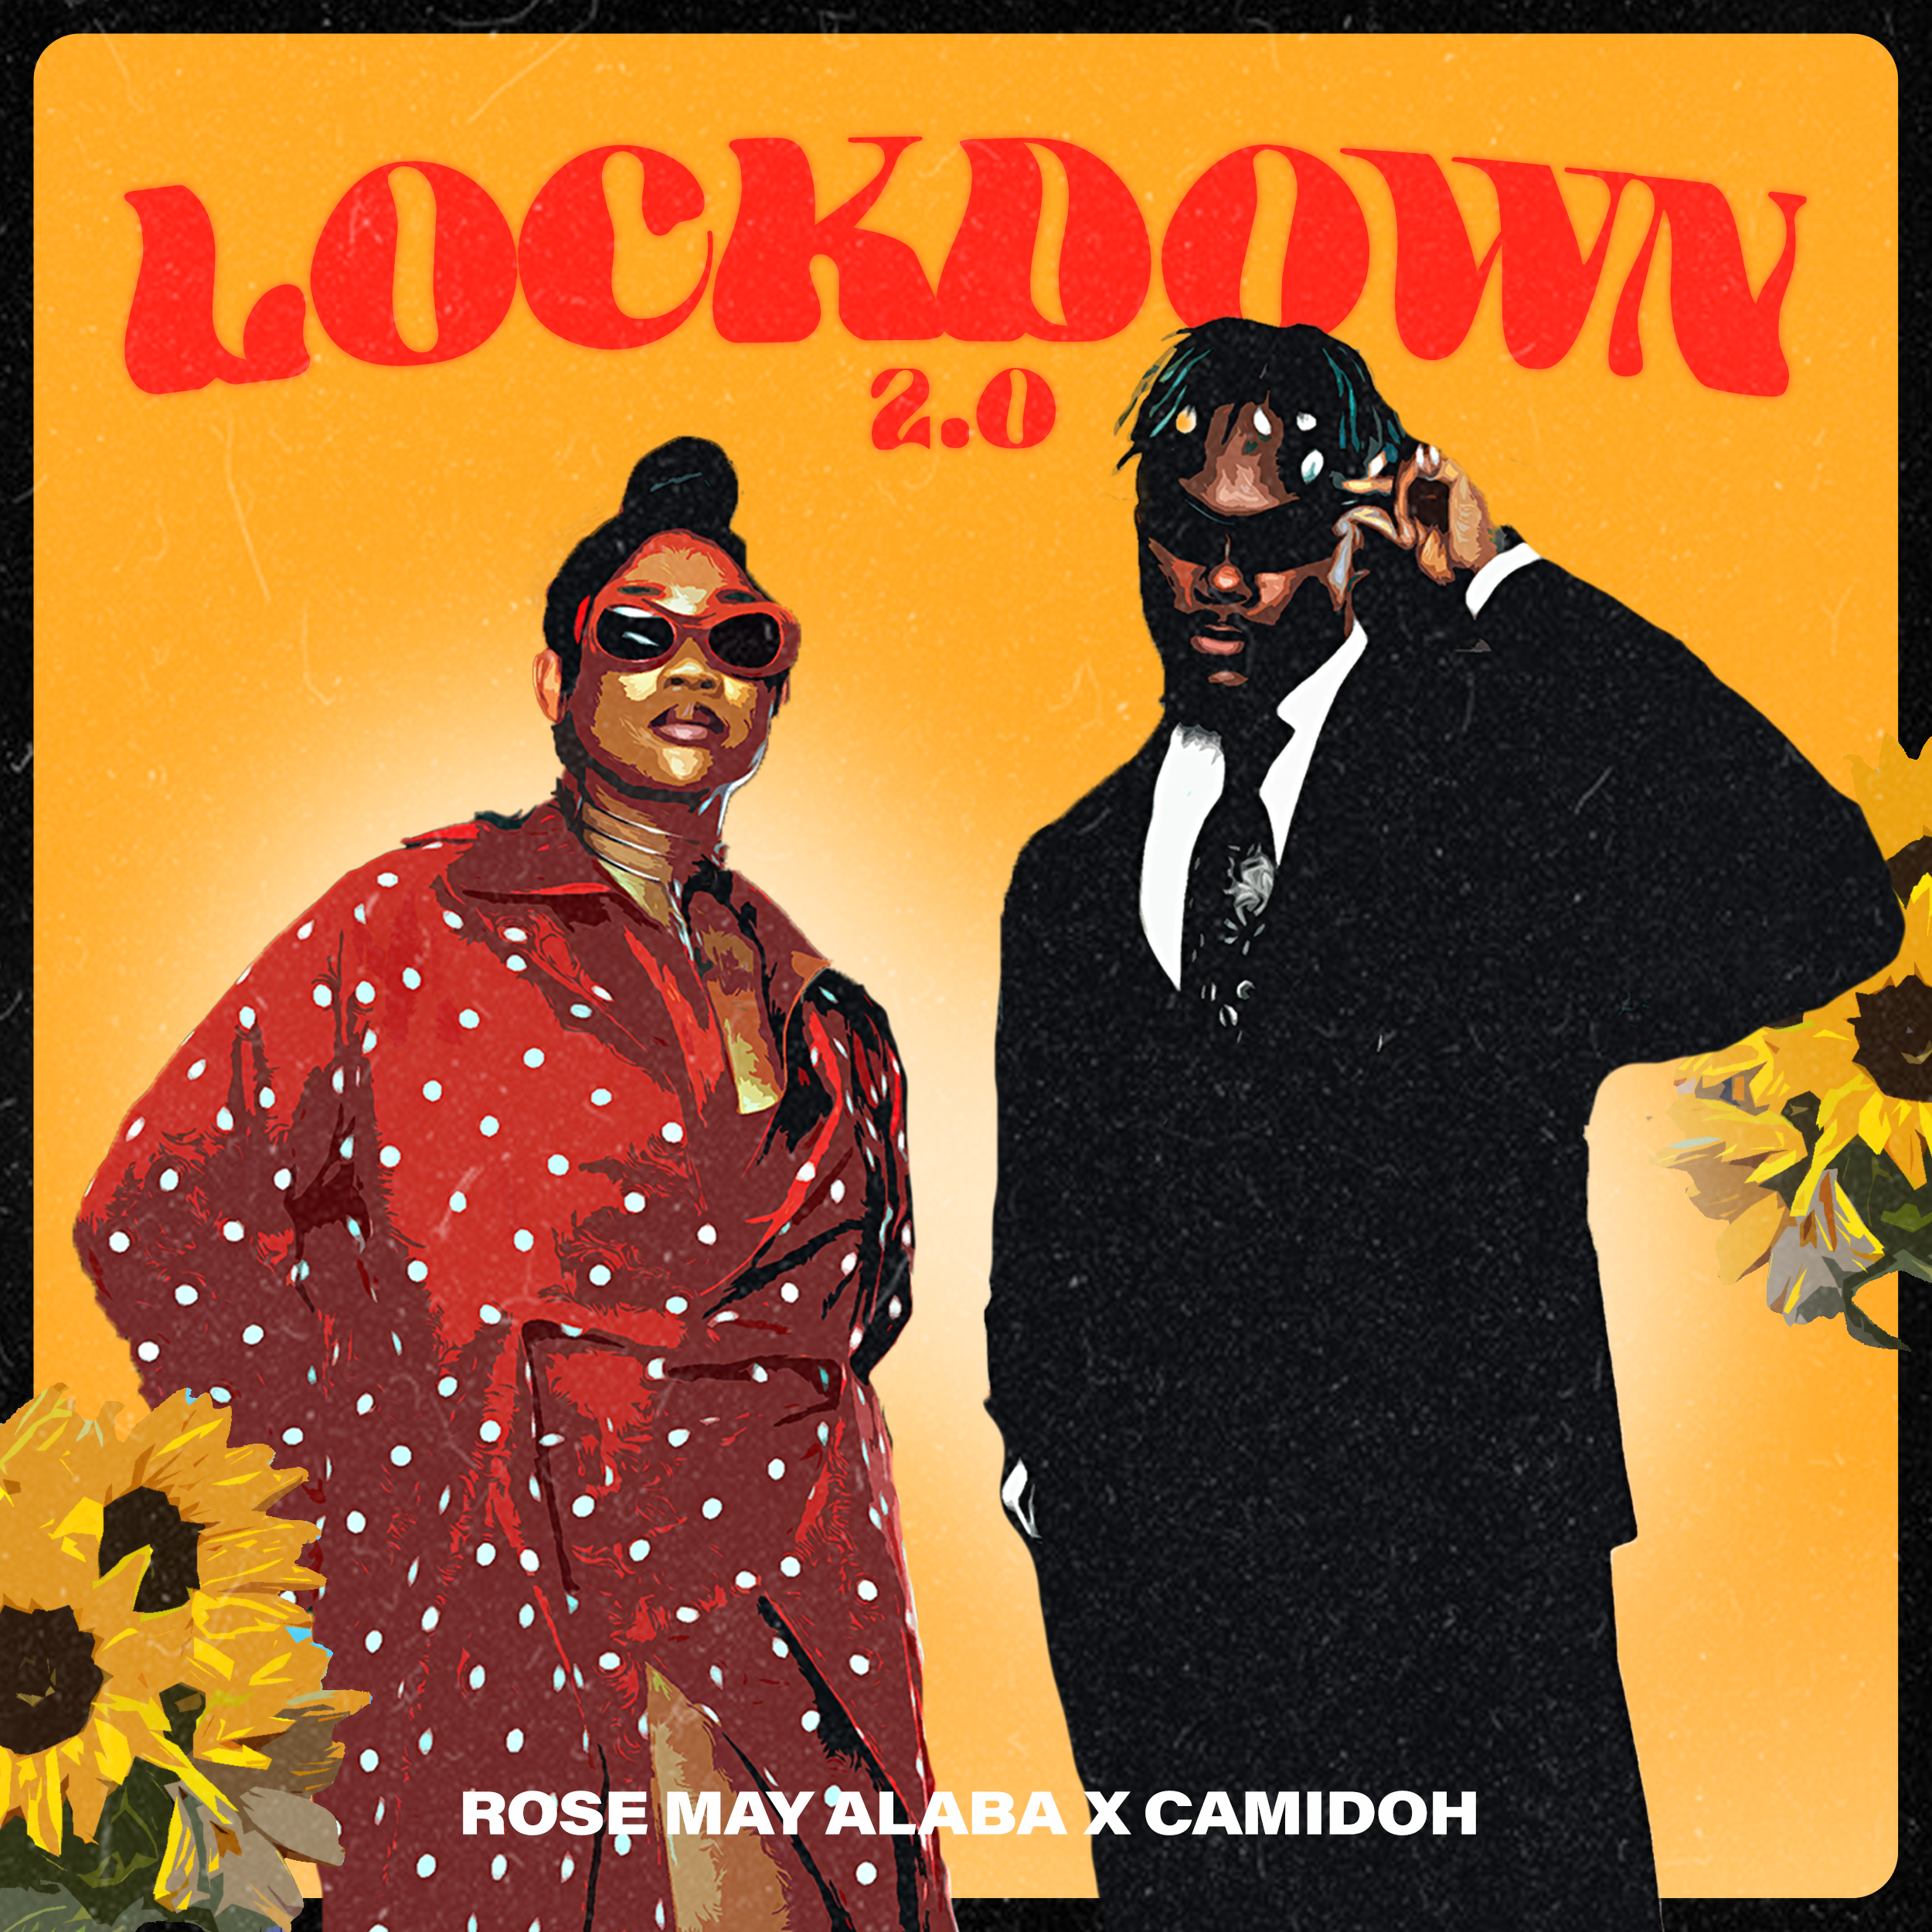 Rose May Alaba Releases “Lockdown” Remix ft. Camidoh